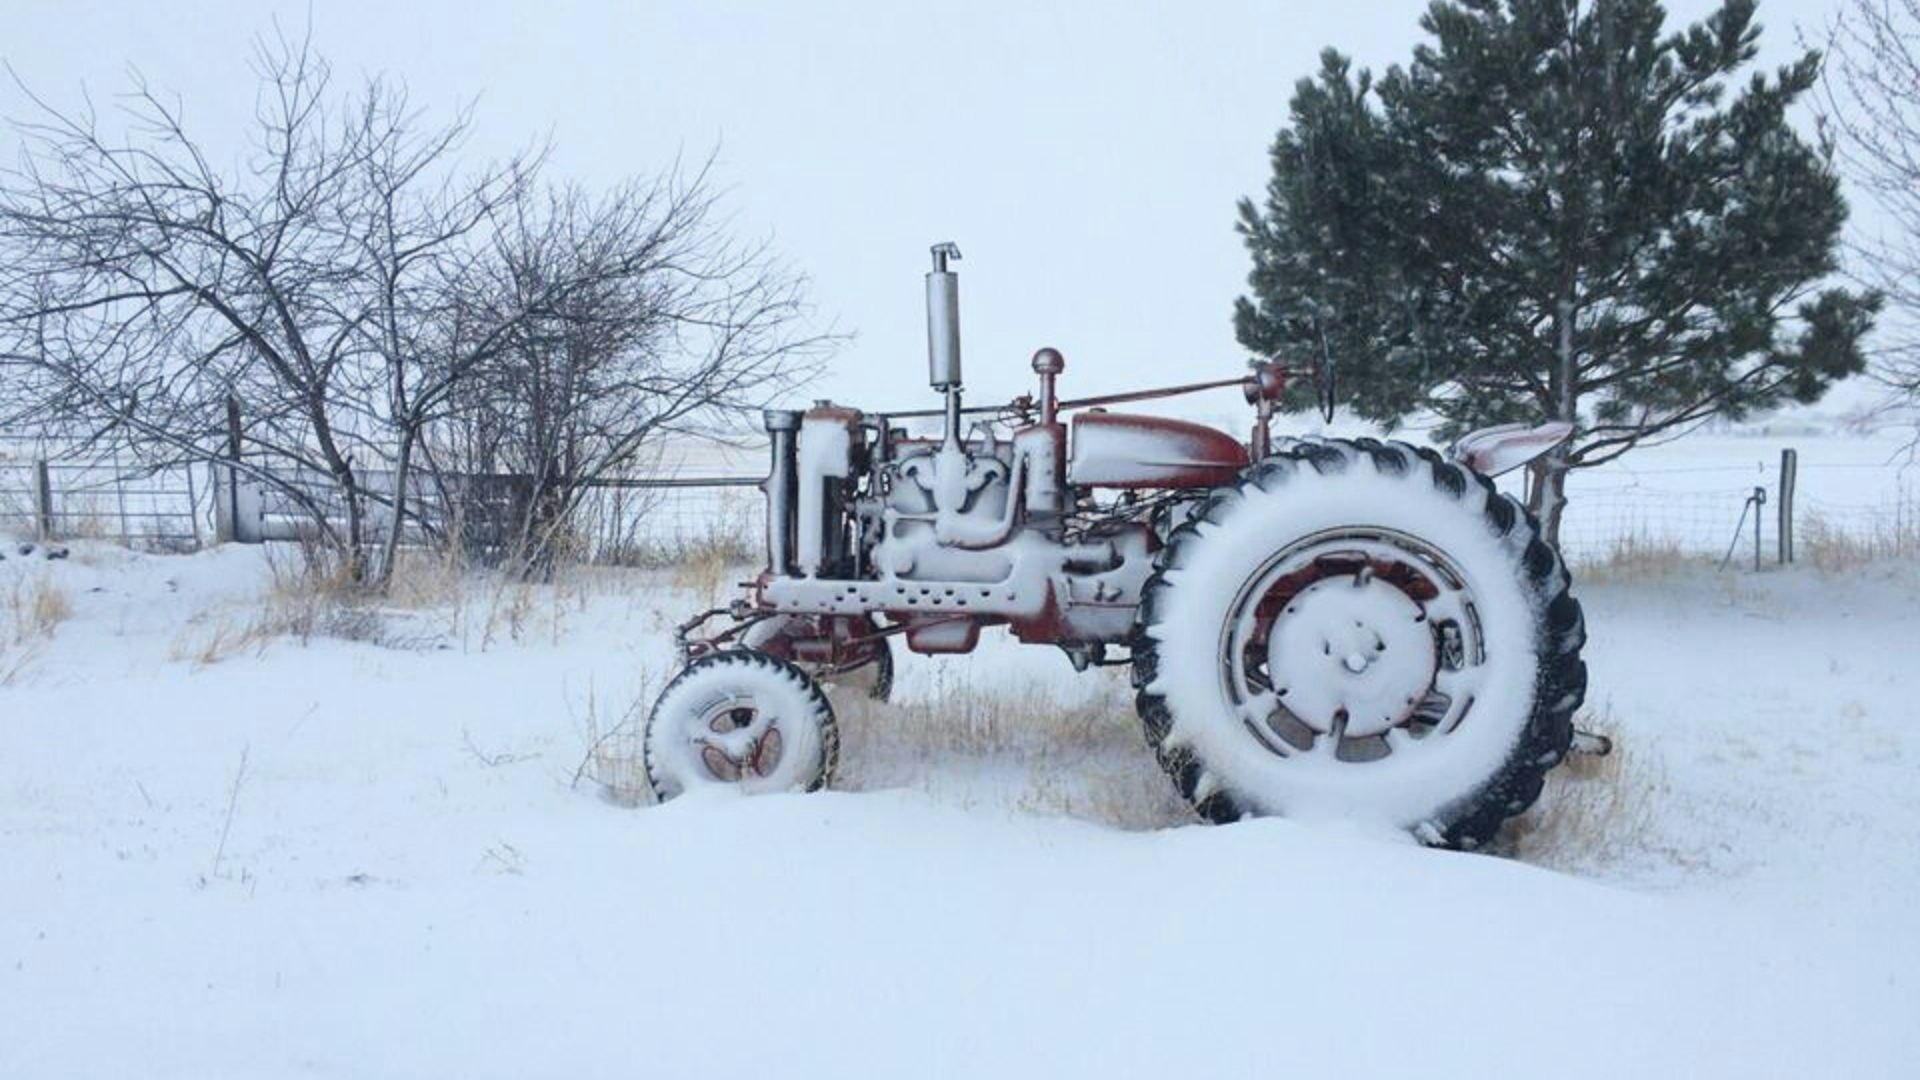 At nearly 100 inches, this winter's snowfall in Riverton has eclipsed the town's previous record set more than a century ago.